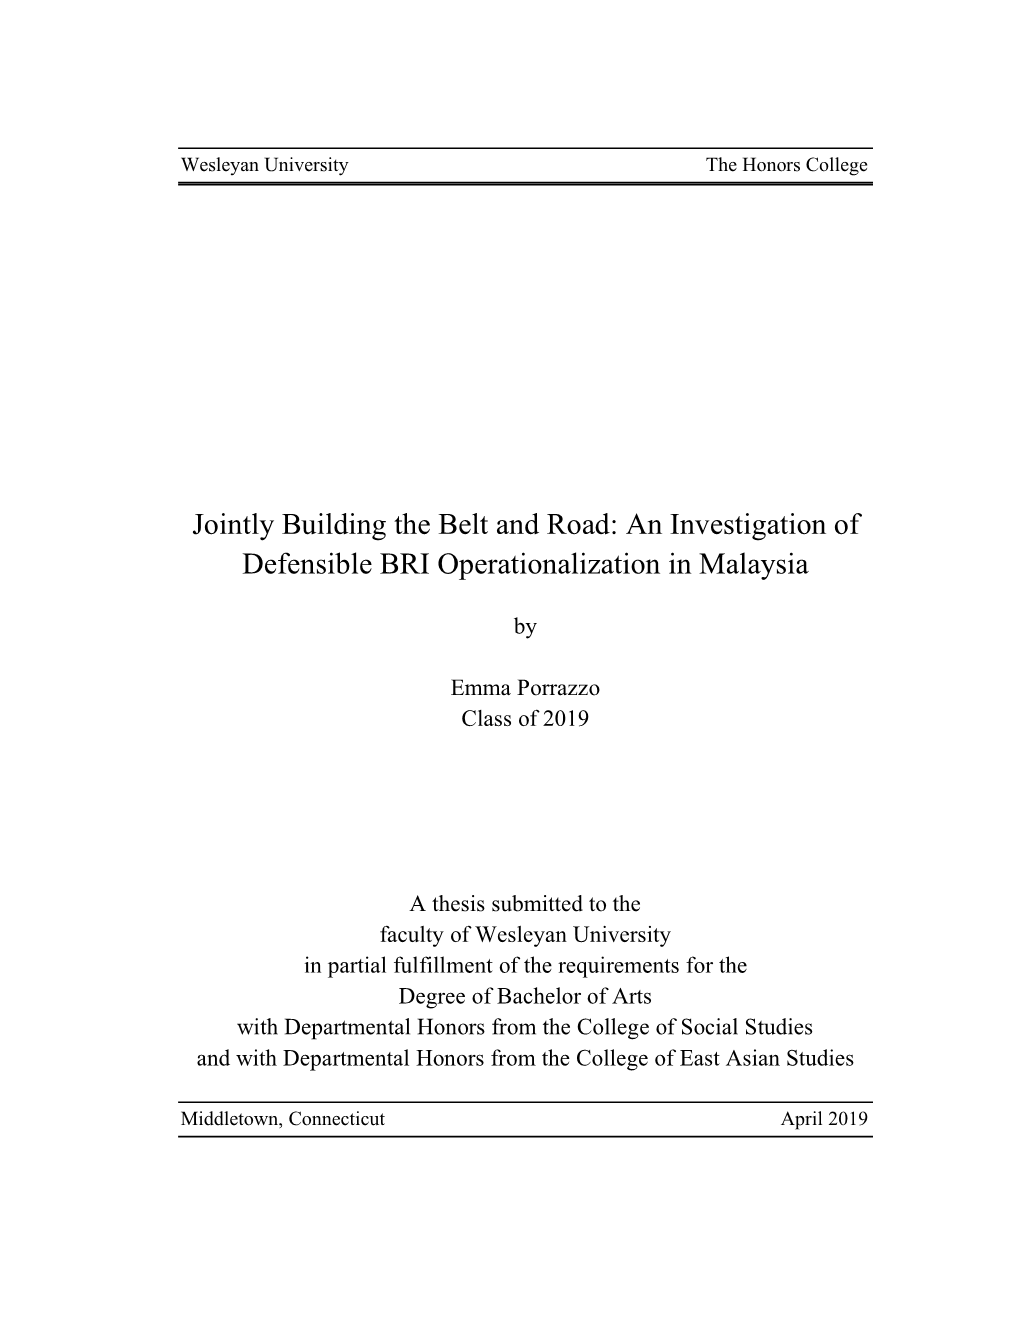 An Investigation of Defensible BRI Operationalization in Malaysia